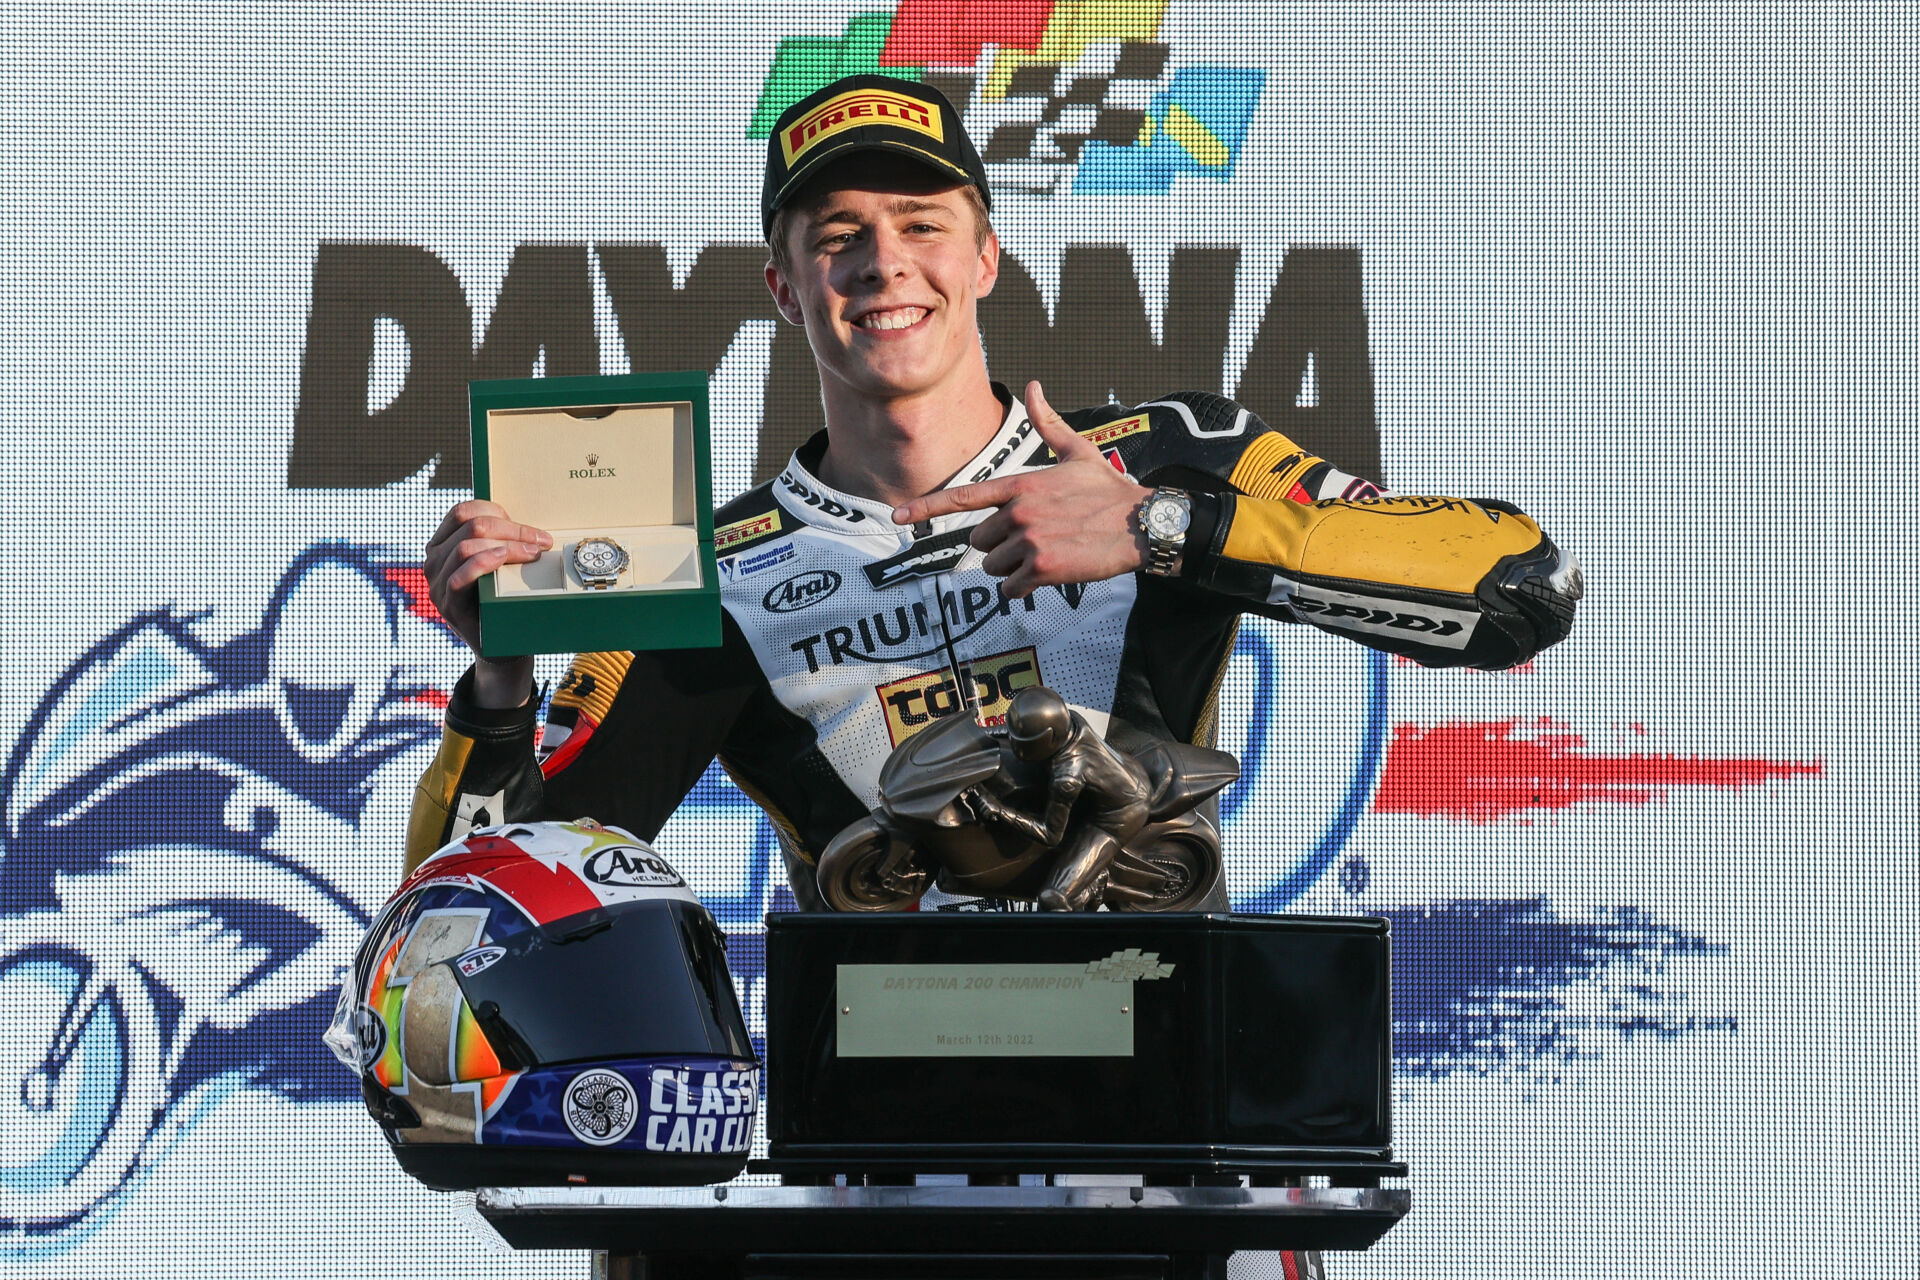 For the second consecutive year, Brandon Paasch collected the victory and Rolex watch. Photo by Brian J. Nelson, courtesy Pirelli.